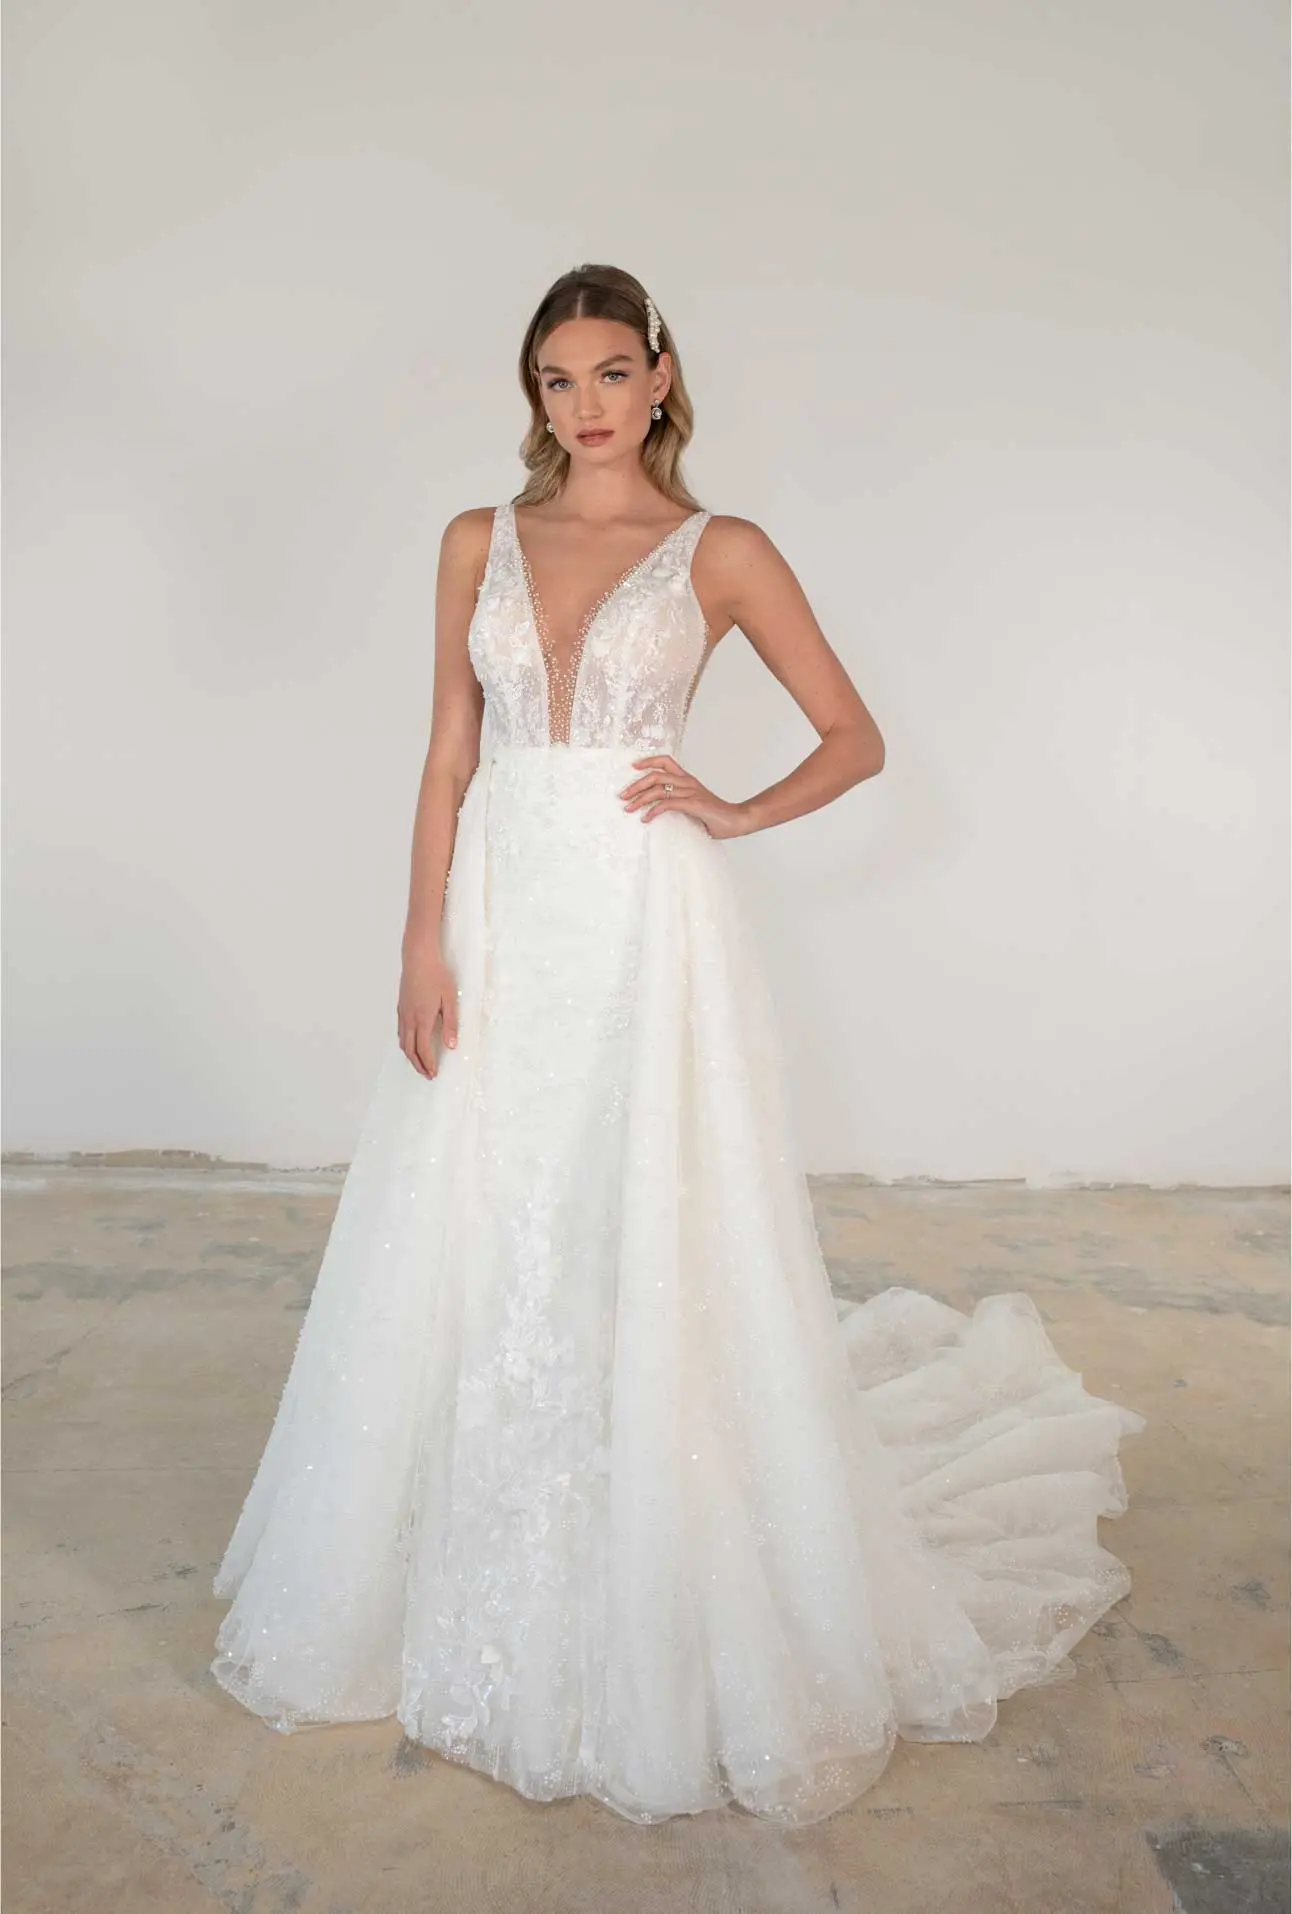 Modern Beaded Sheath Gown With Detachable Overskirt by Martina Liana Luxe - Image 3